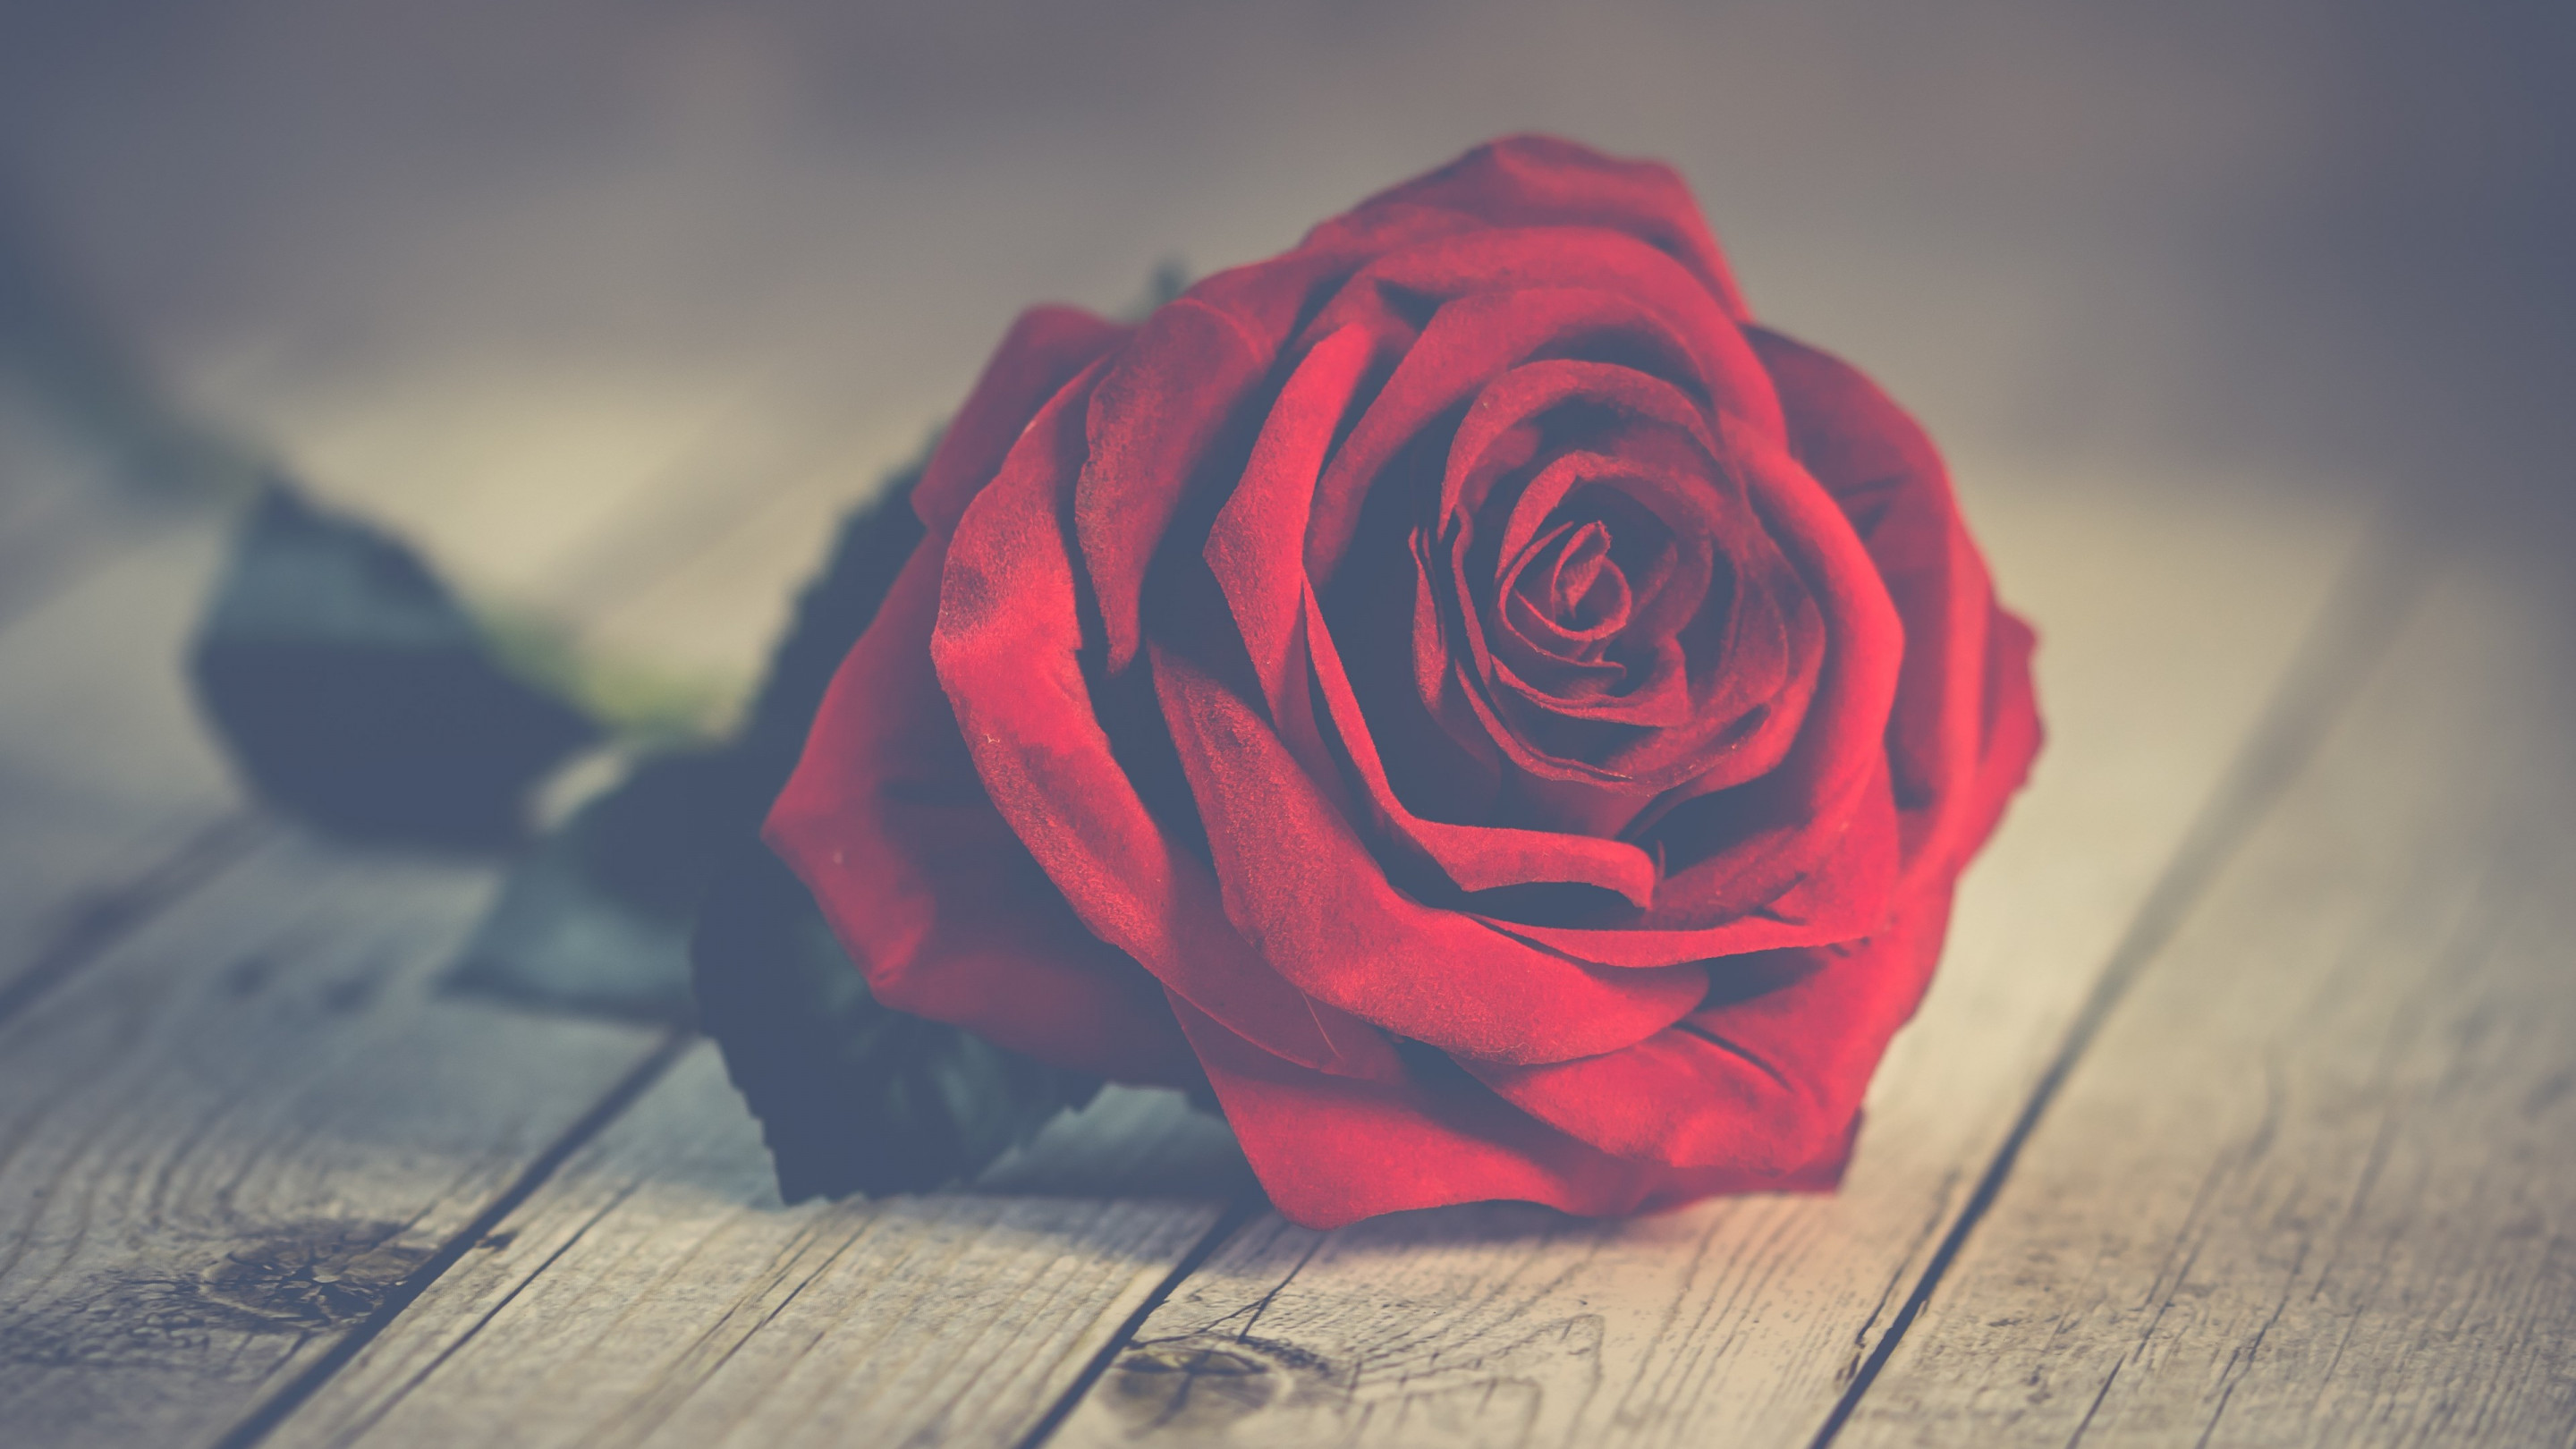 Perfect red rose wallpaper 2880x1620